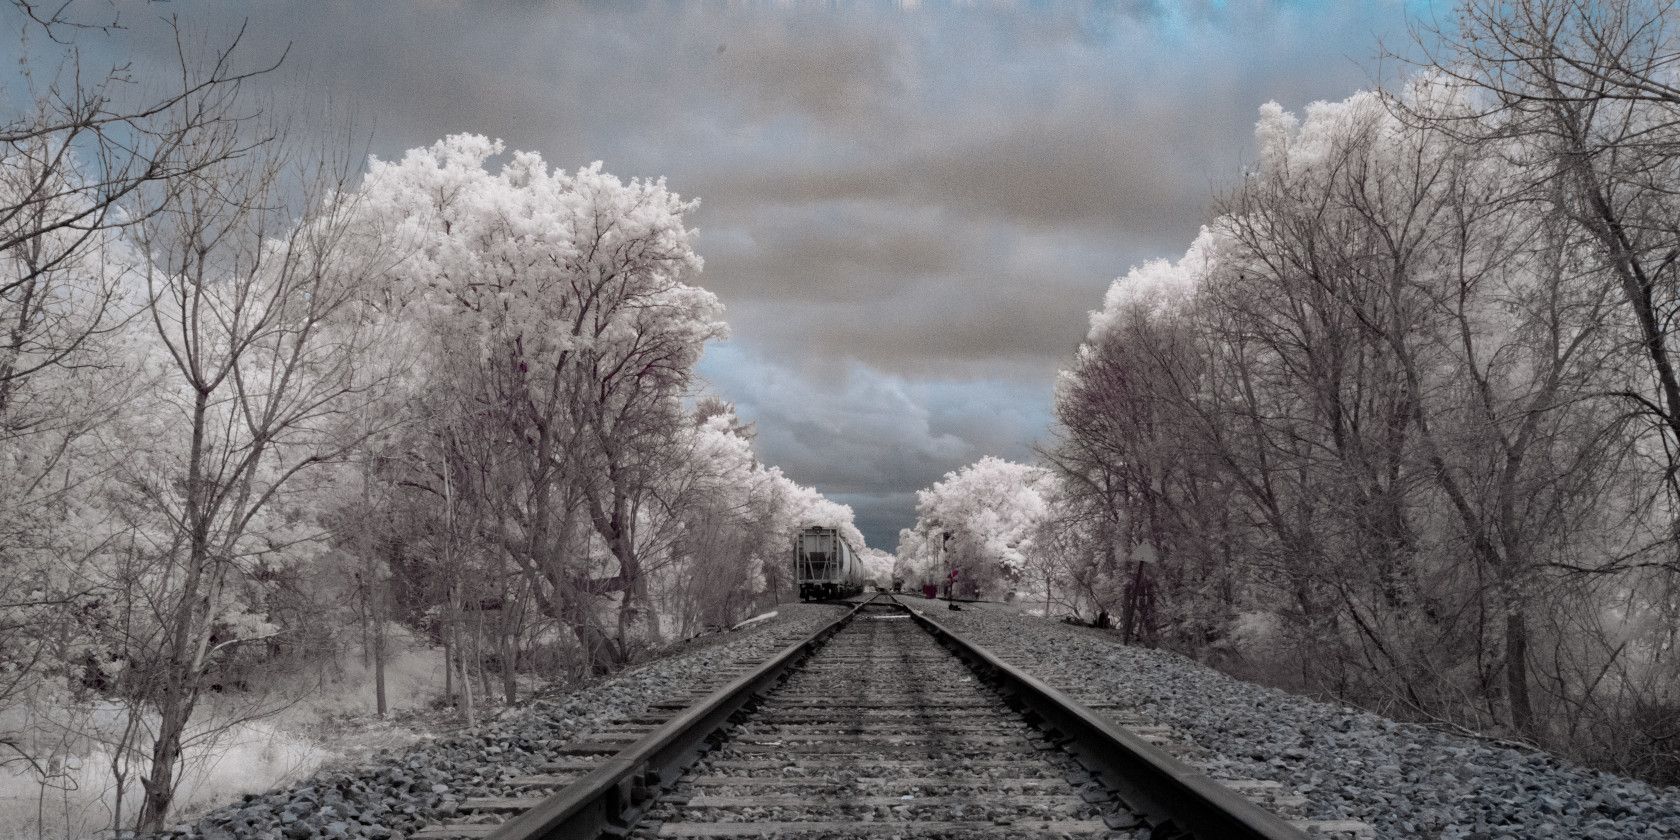 An example of IR landscape photography